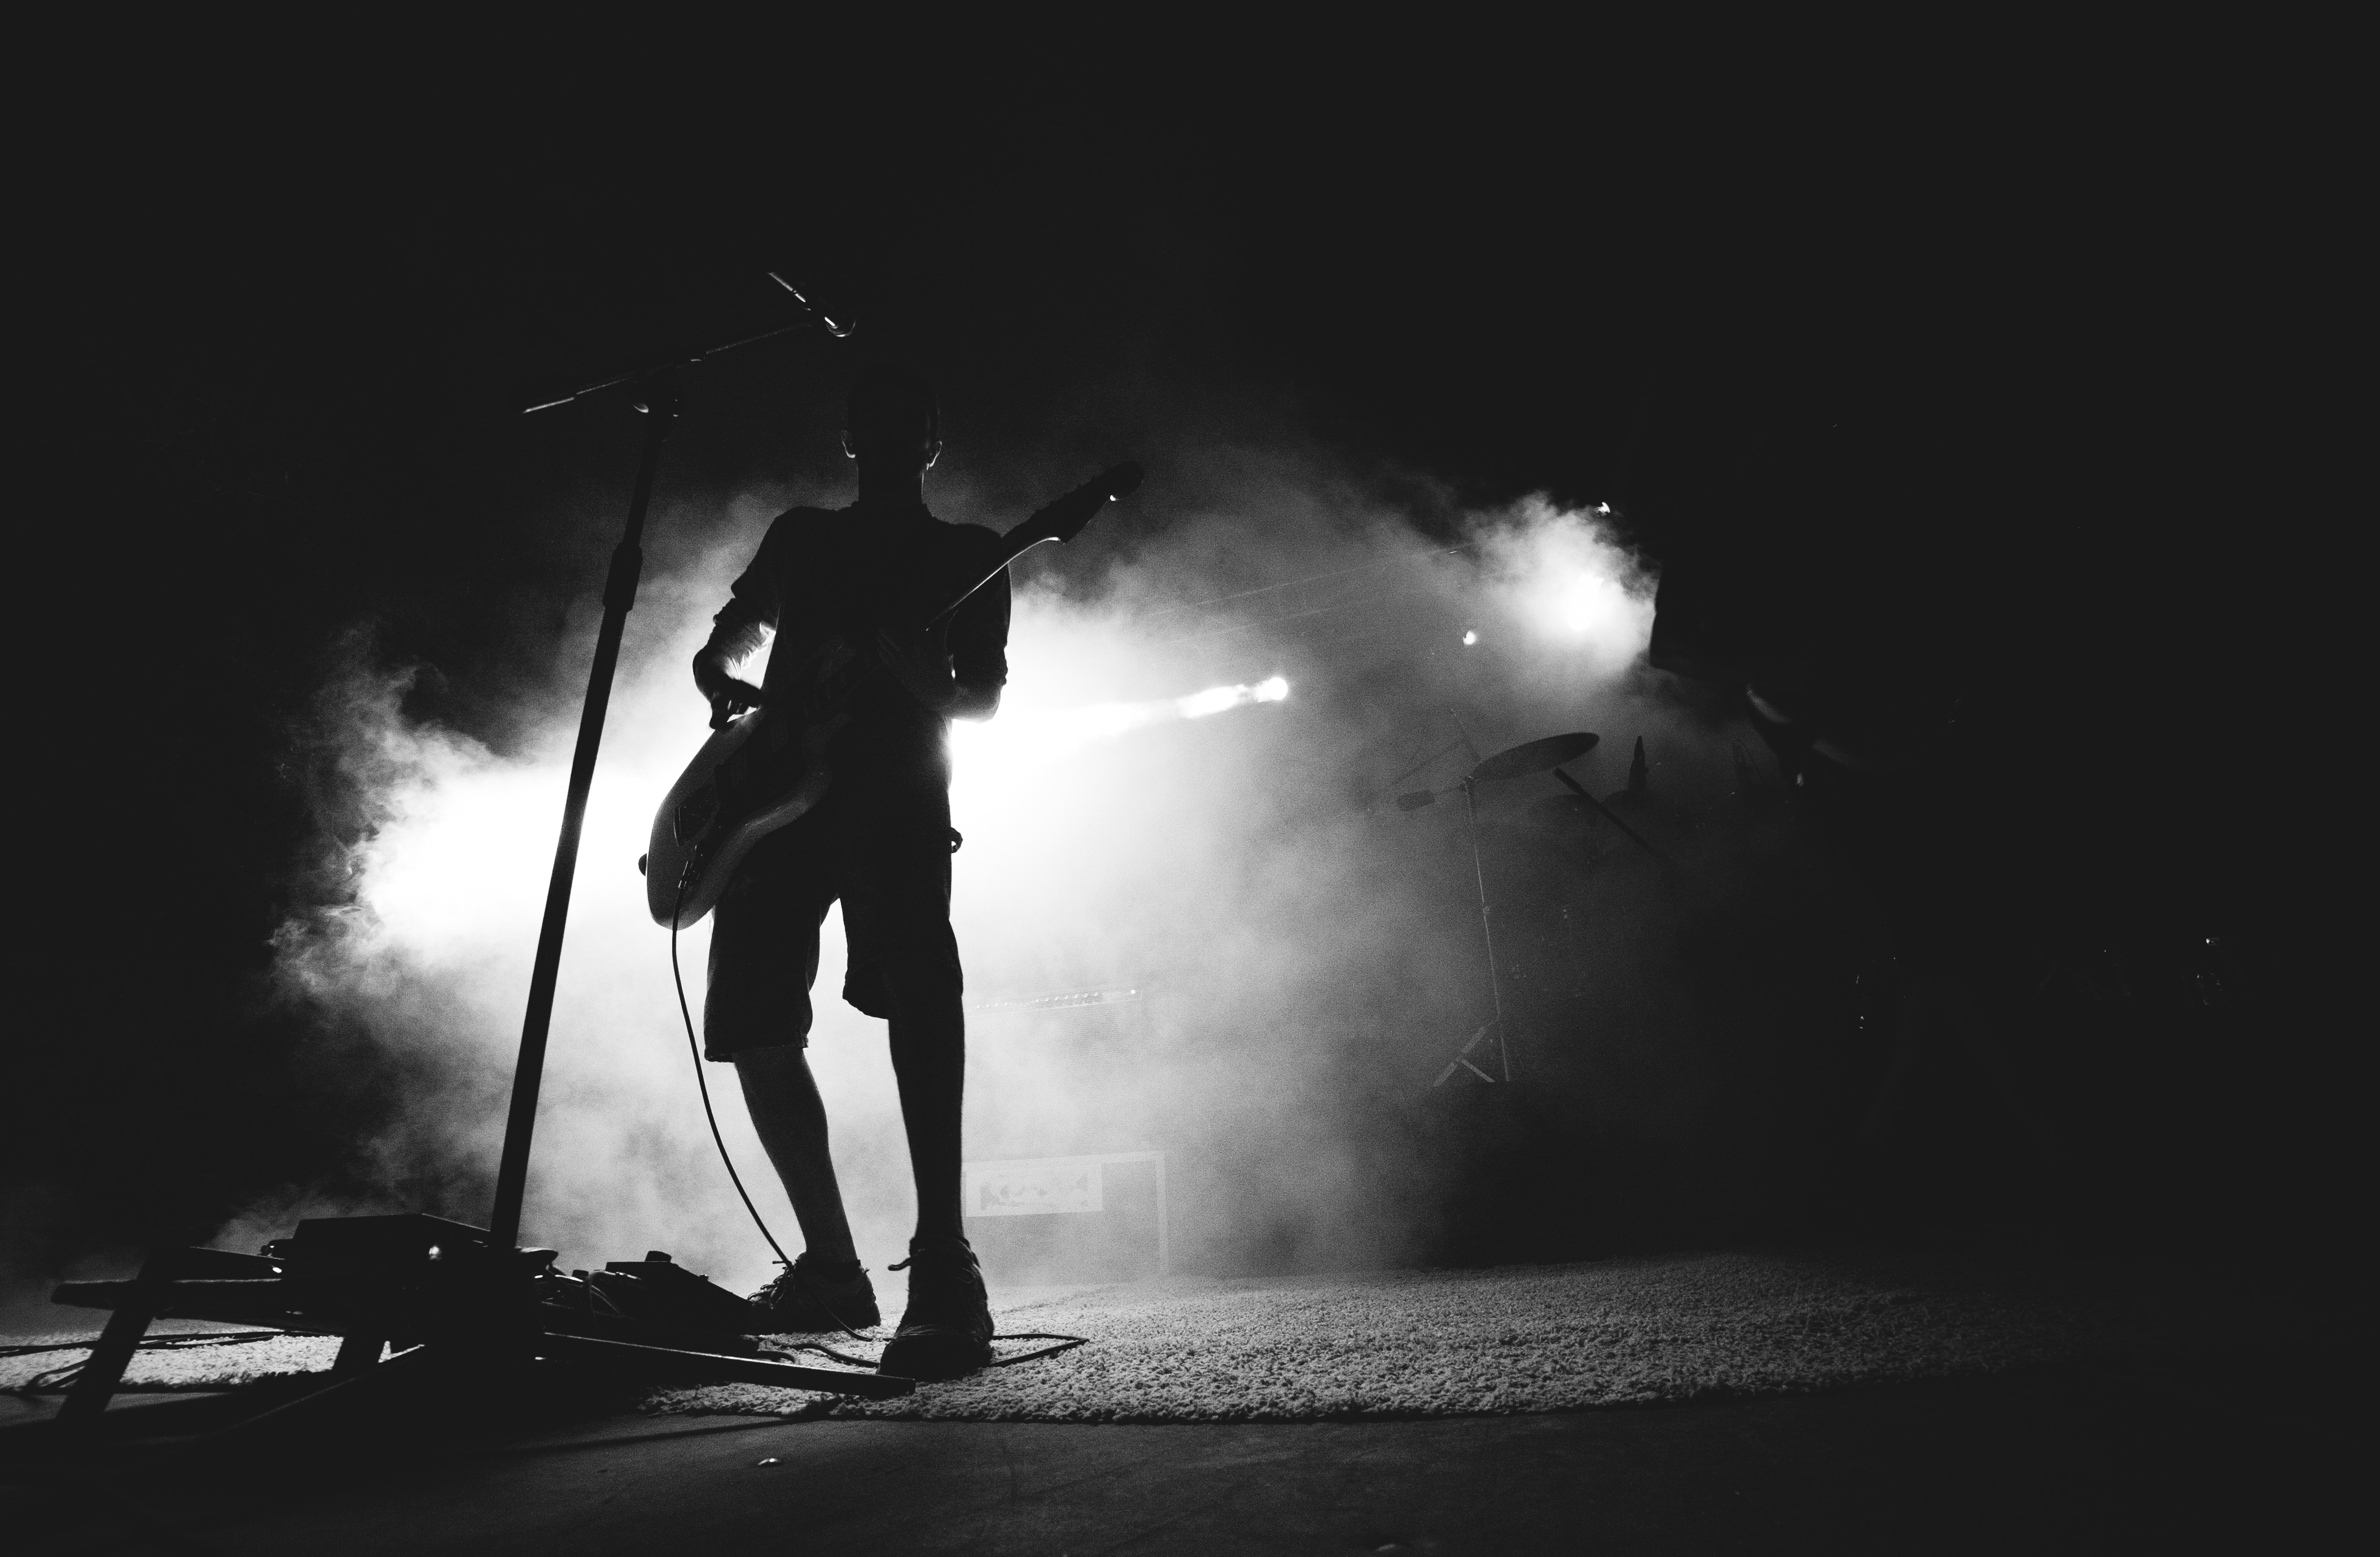 guitar player, guitarist, black and white, black, smoke, musician, concert, microphone, performance